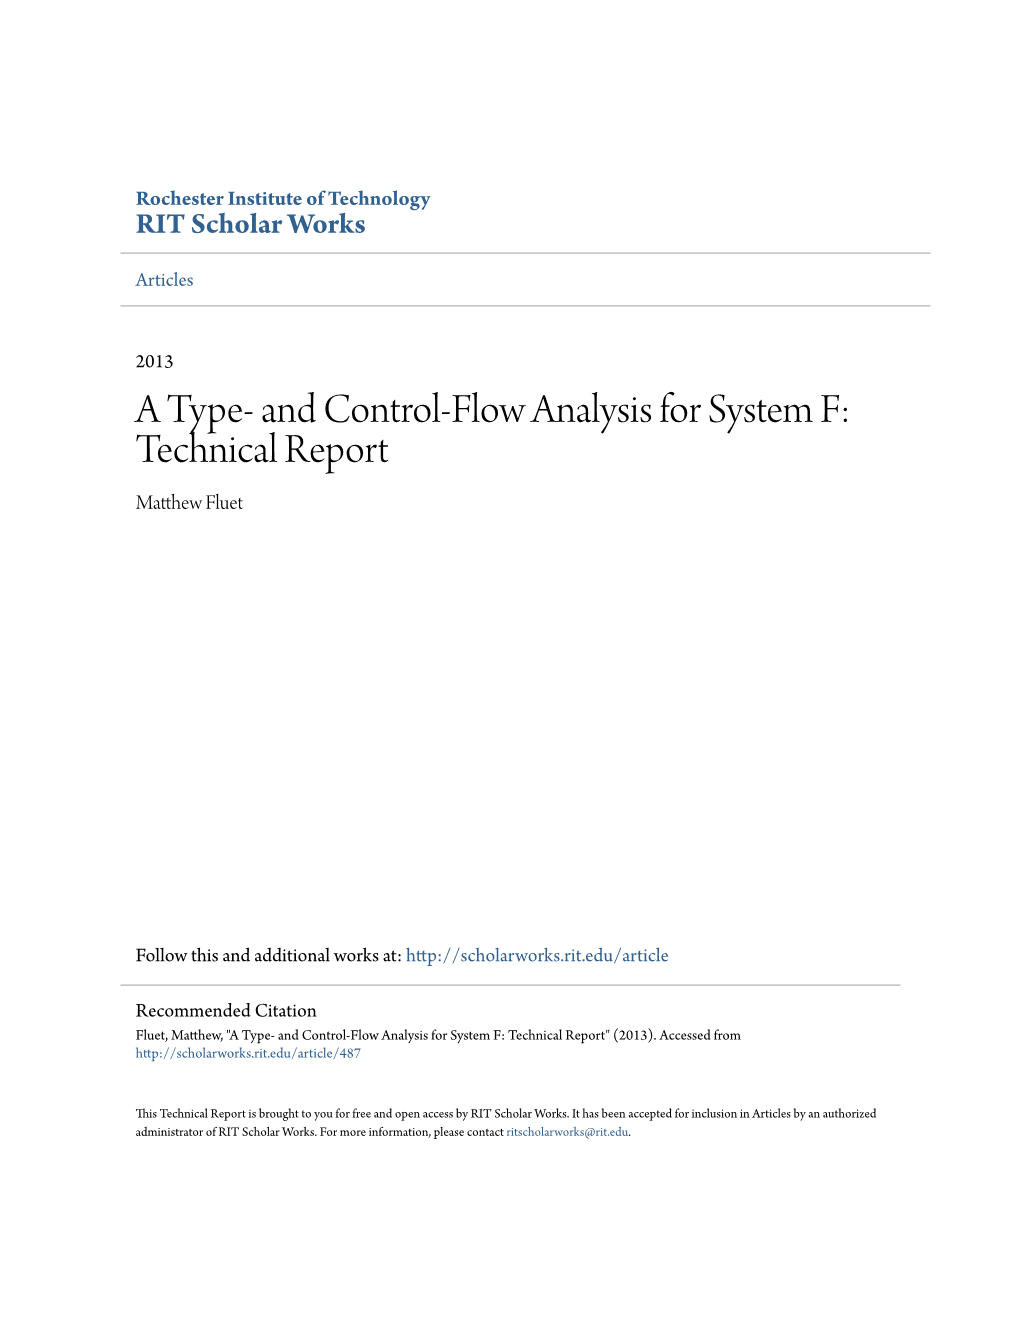 A Type- and Control-Flow Analysis for System F: Technical Report Matthew Luetf